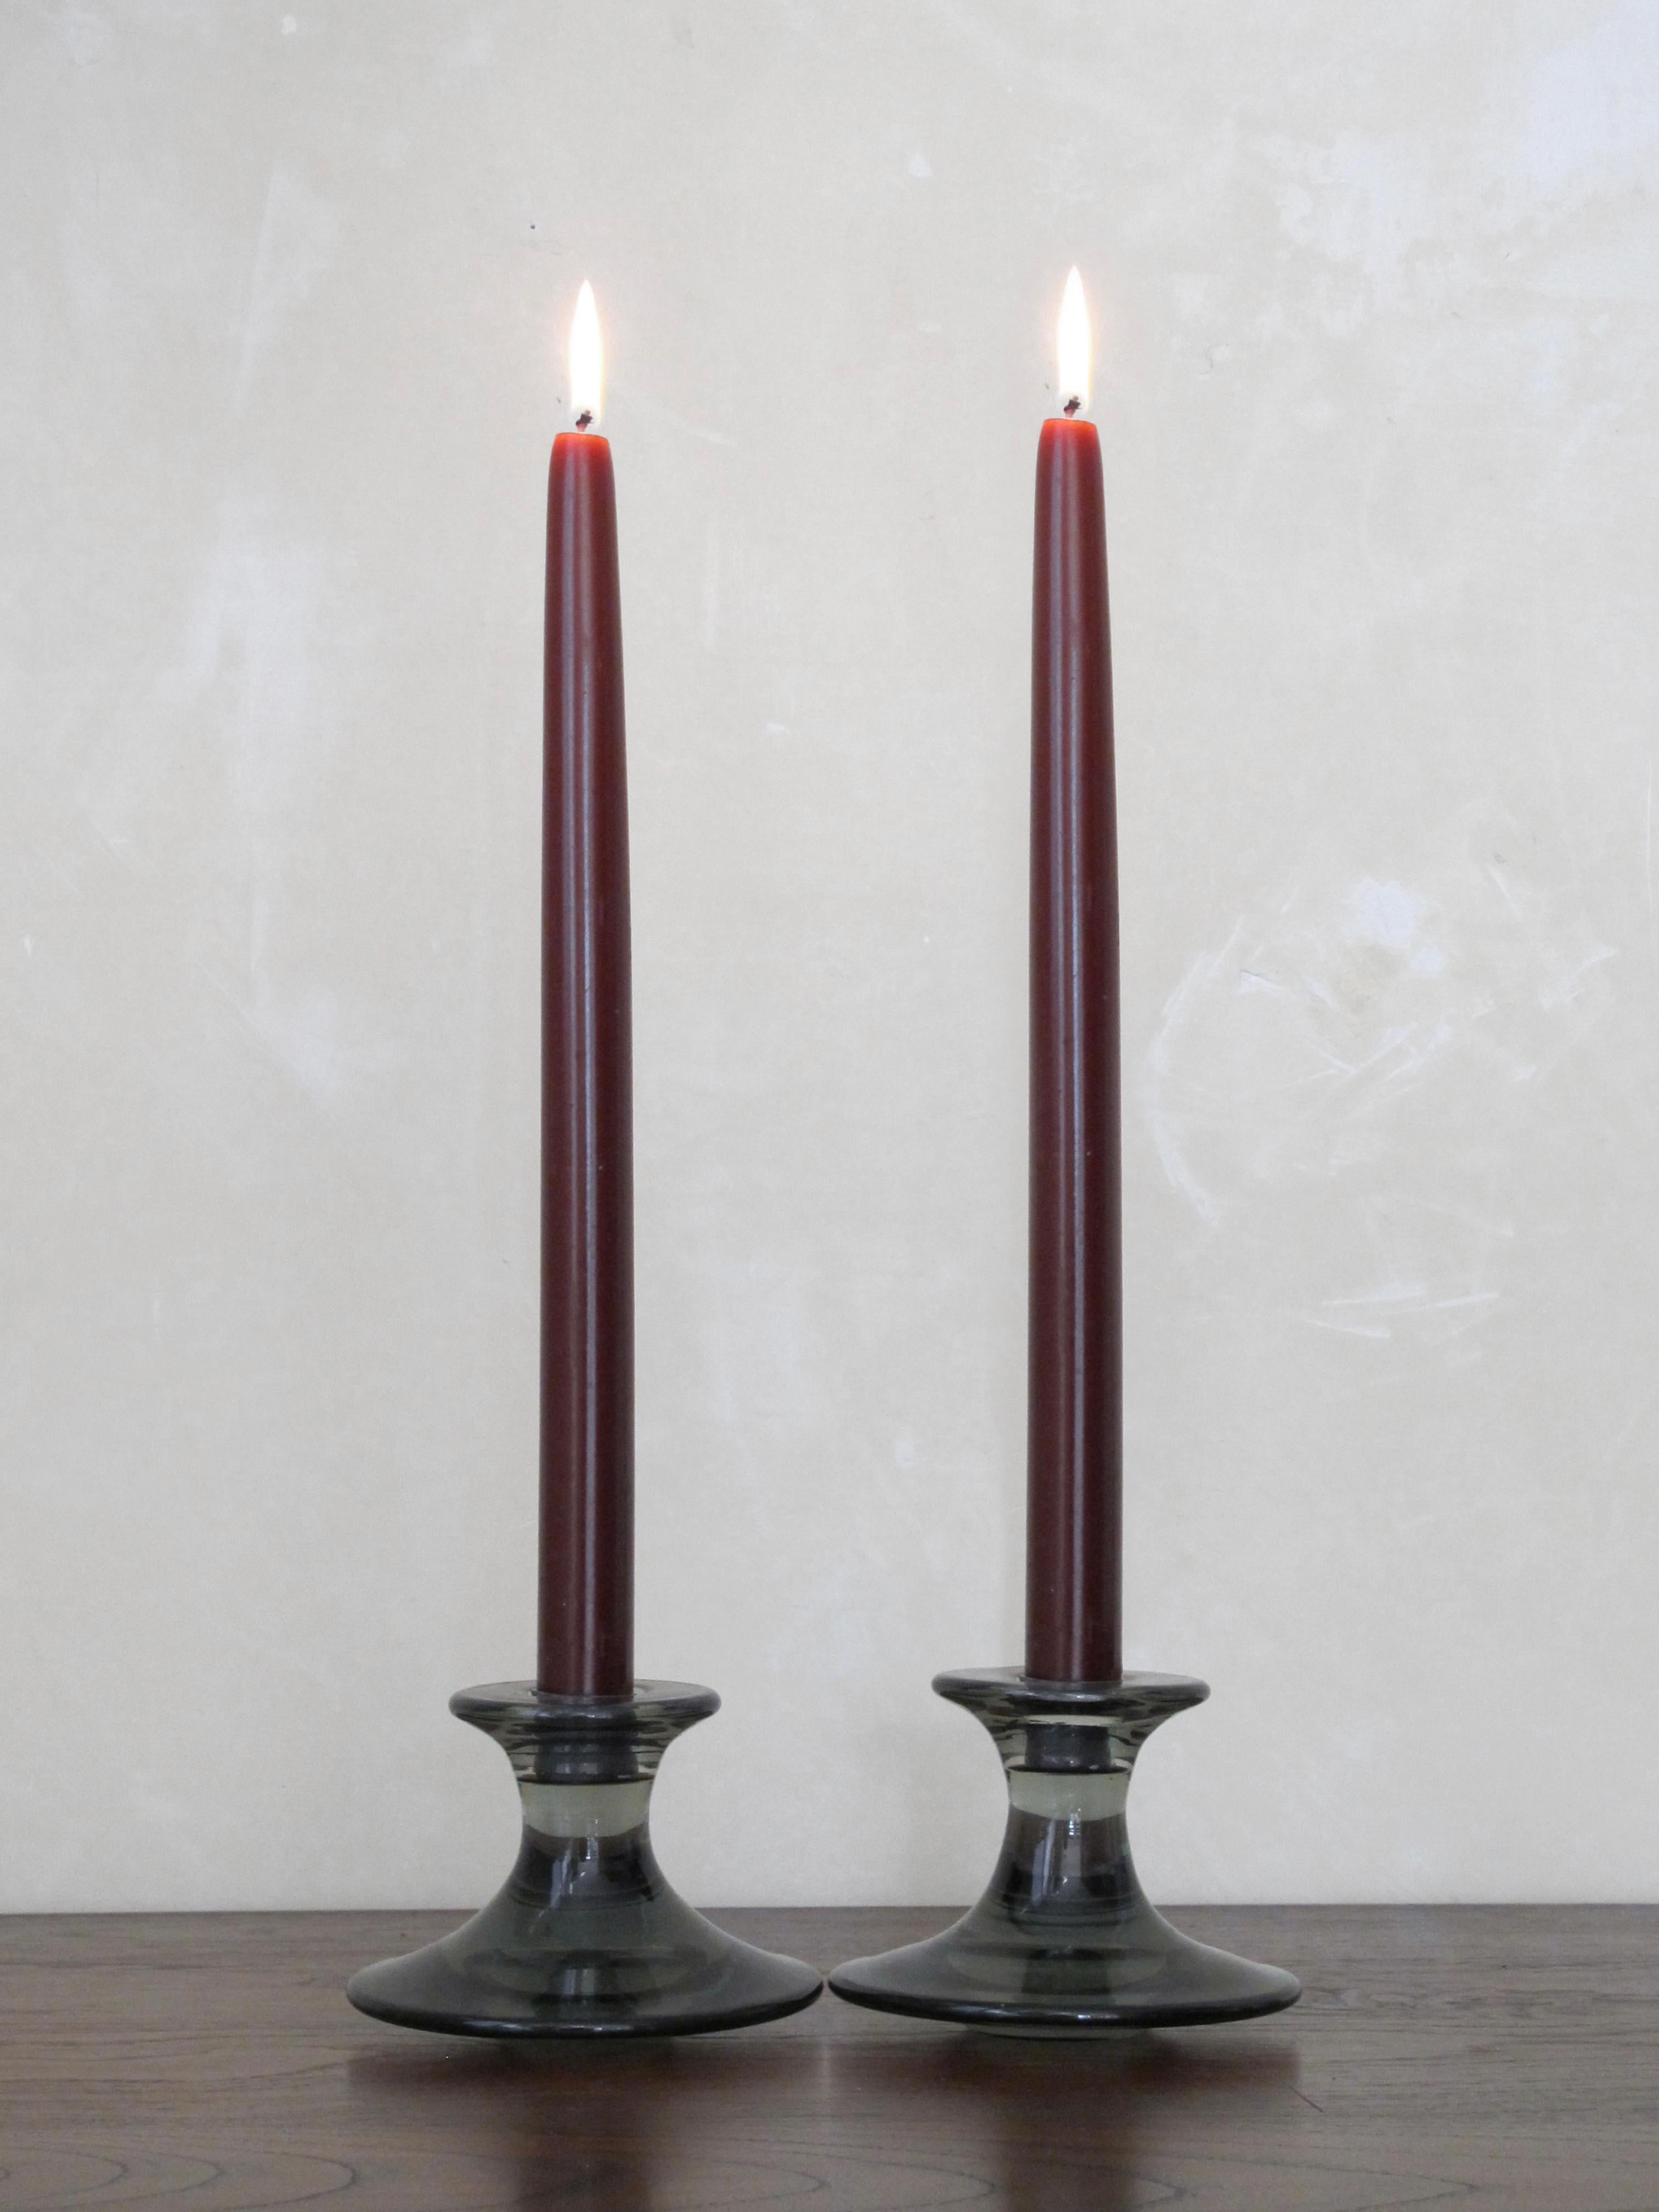 Pair of scandinavian Mid-Century Modern glass candleholder candlestick holder designed by Per Lutken and production by Holmegaard, Denmark circa 1960s.
Holmegaard signature engraved under the base.